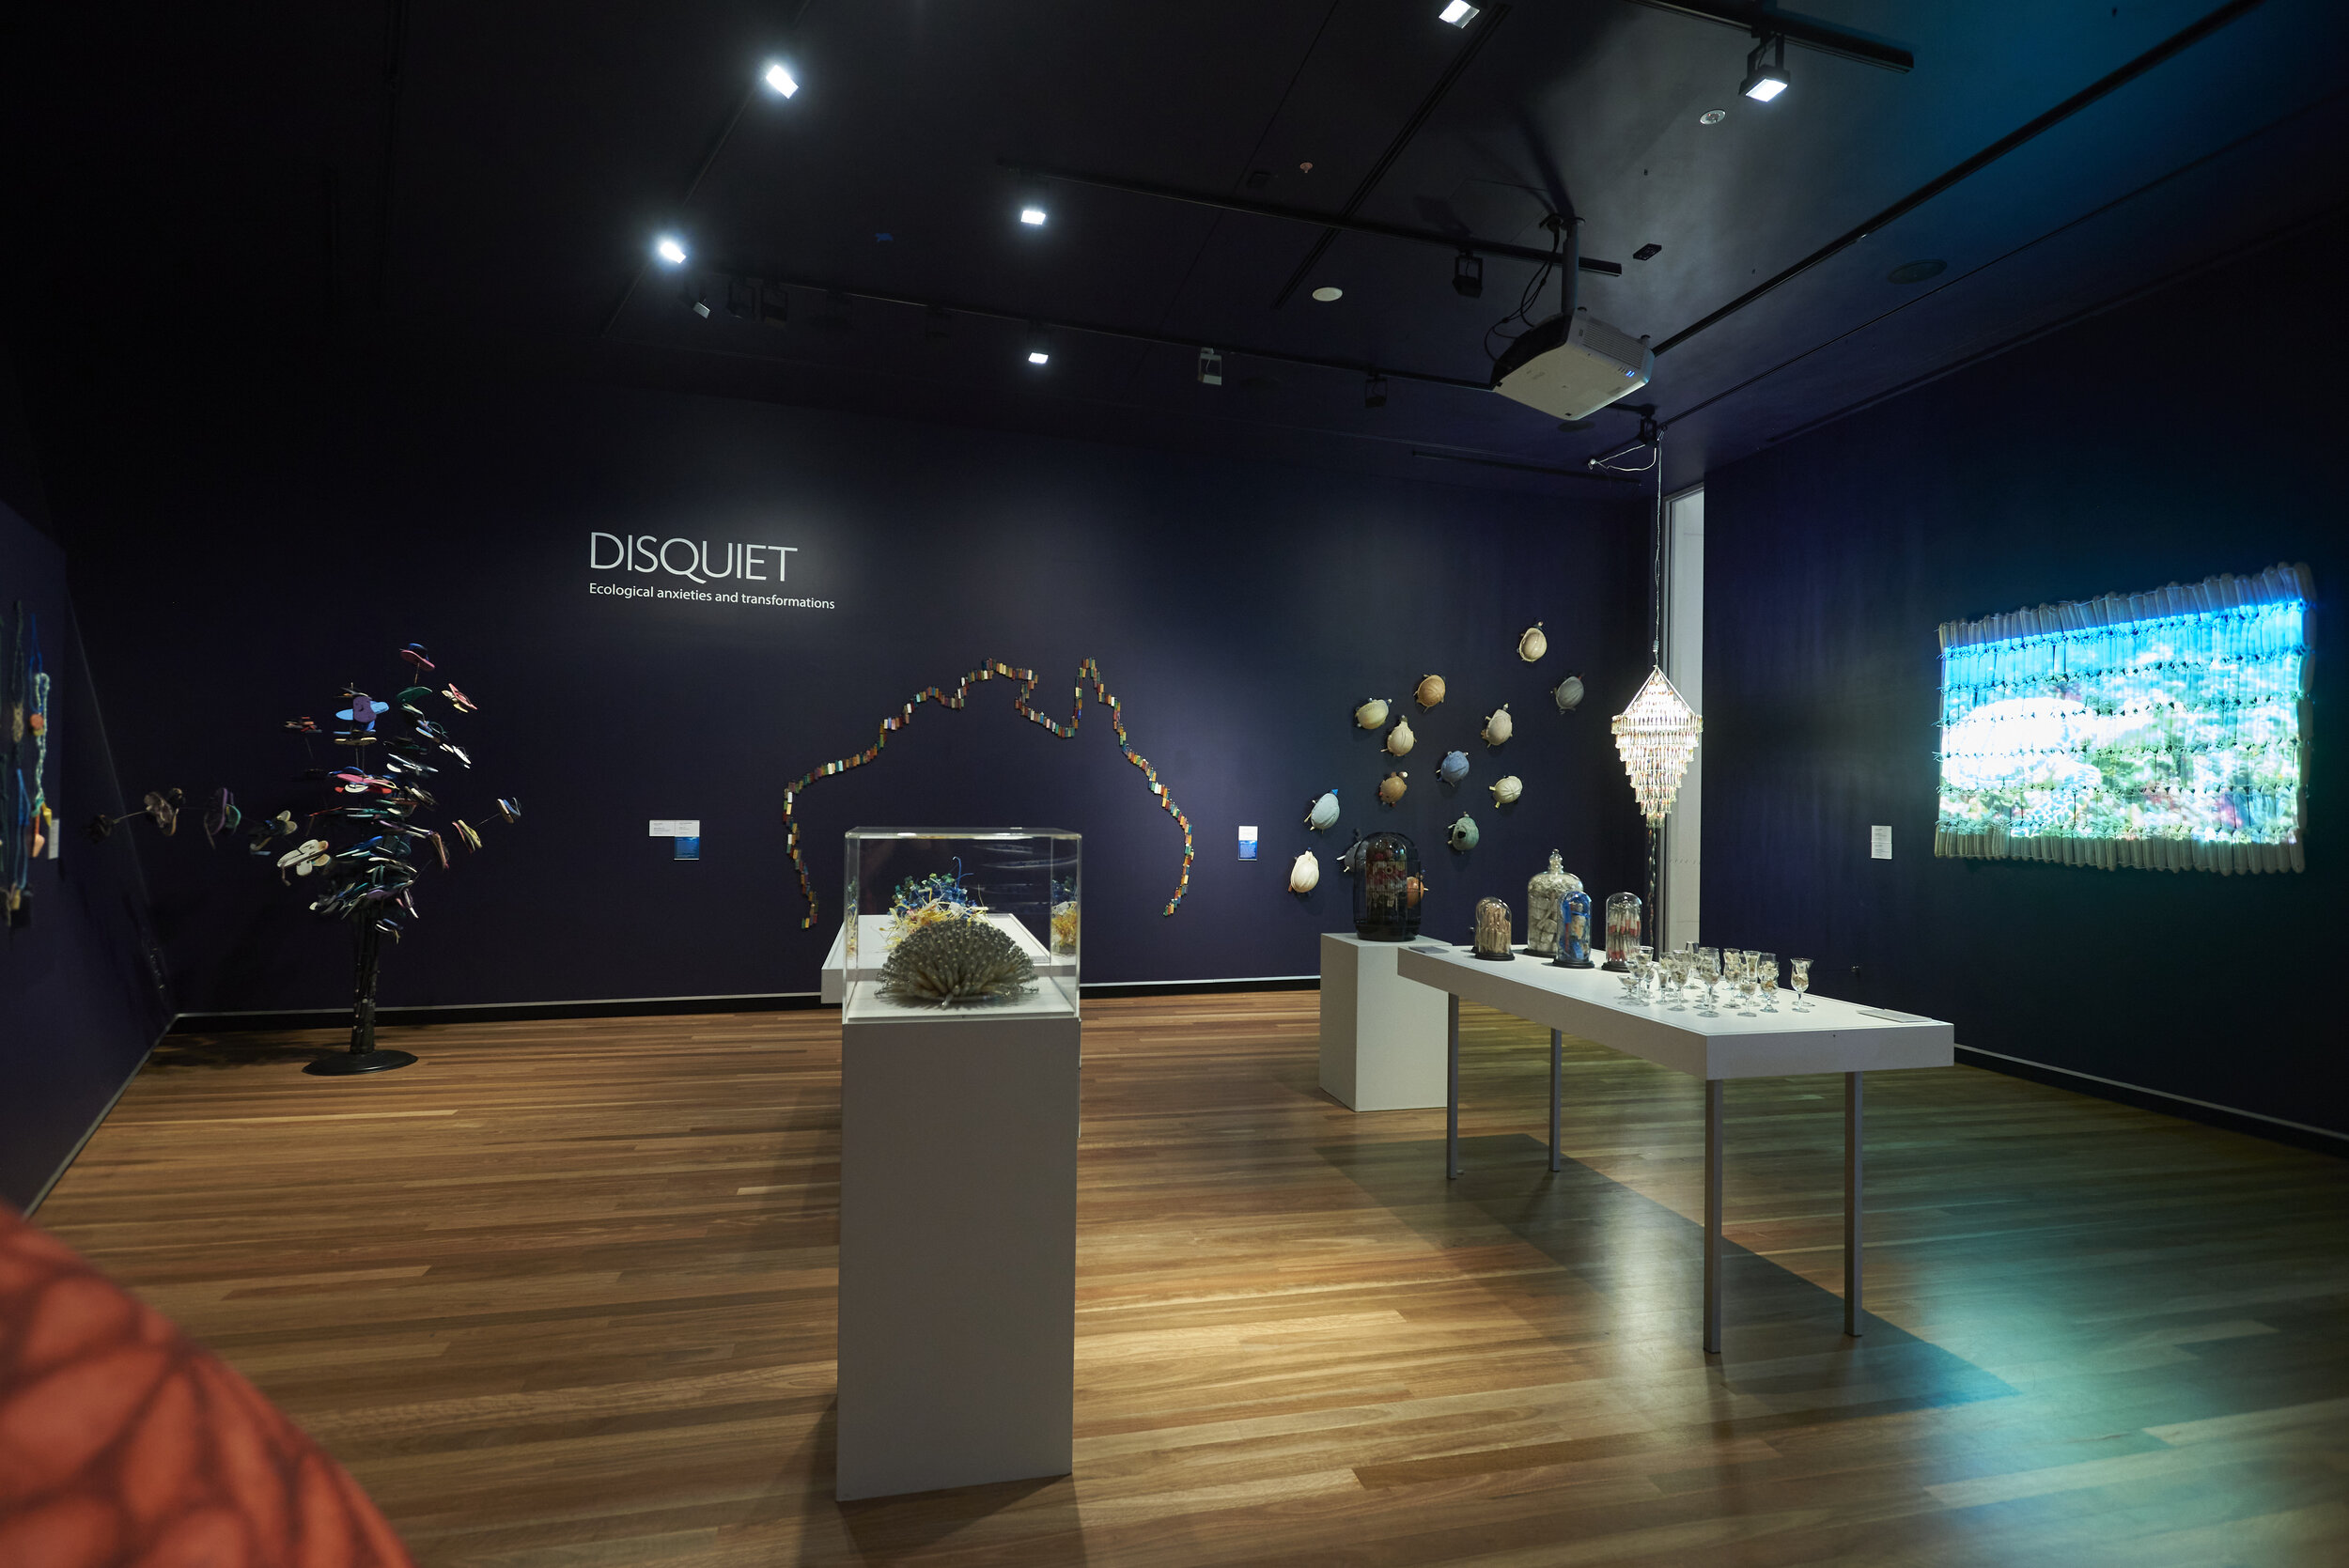   Disquiet: Ecological Anxieties and Transformations , exhibition installation view, Artspace Mackay, 2020; photo: Jim Cullen 